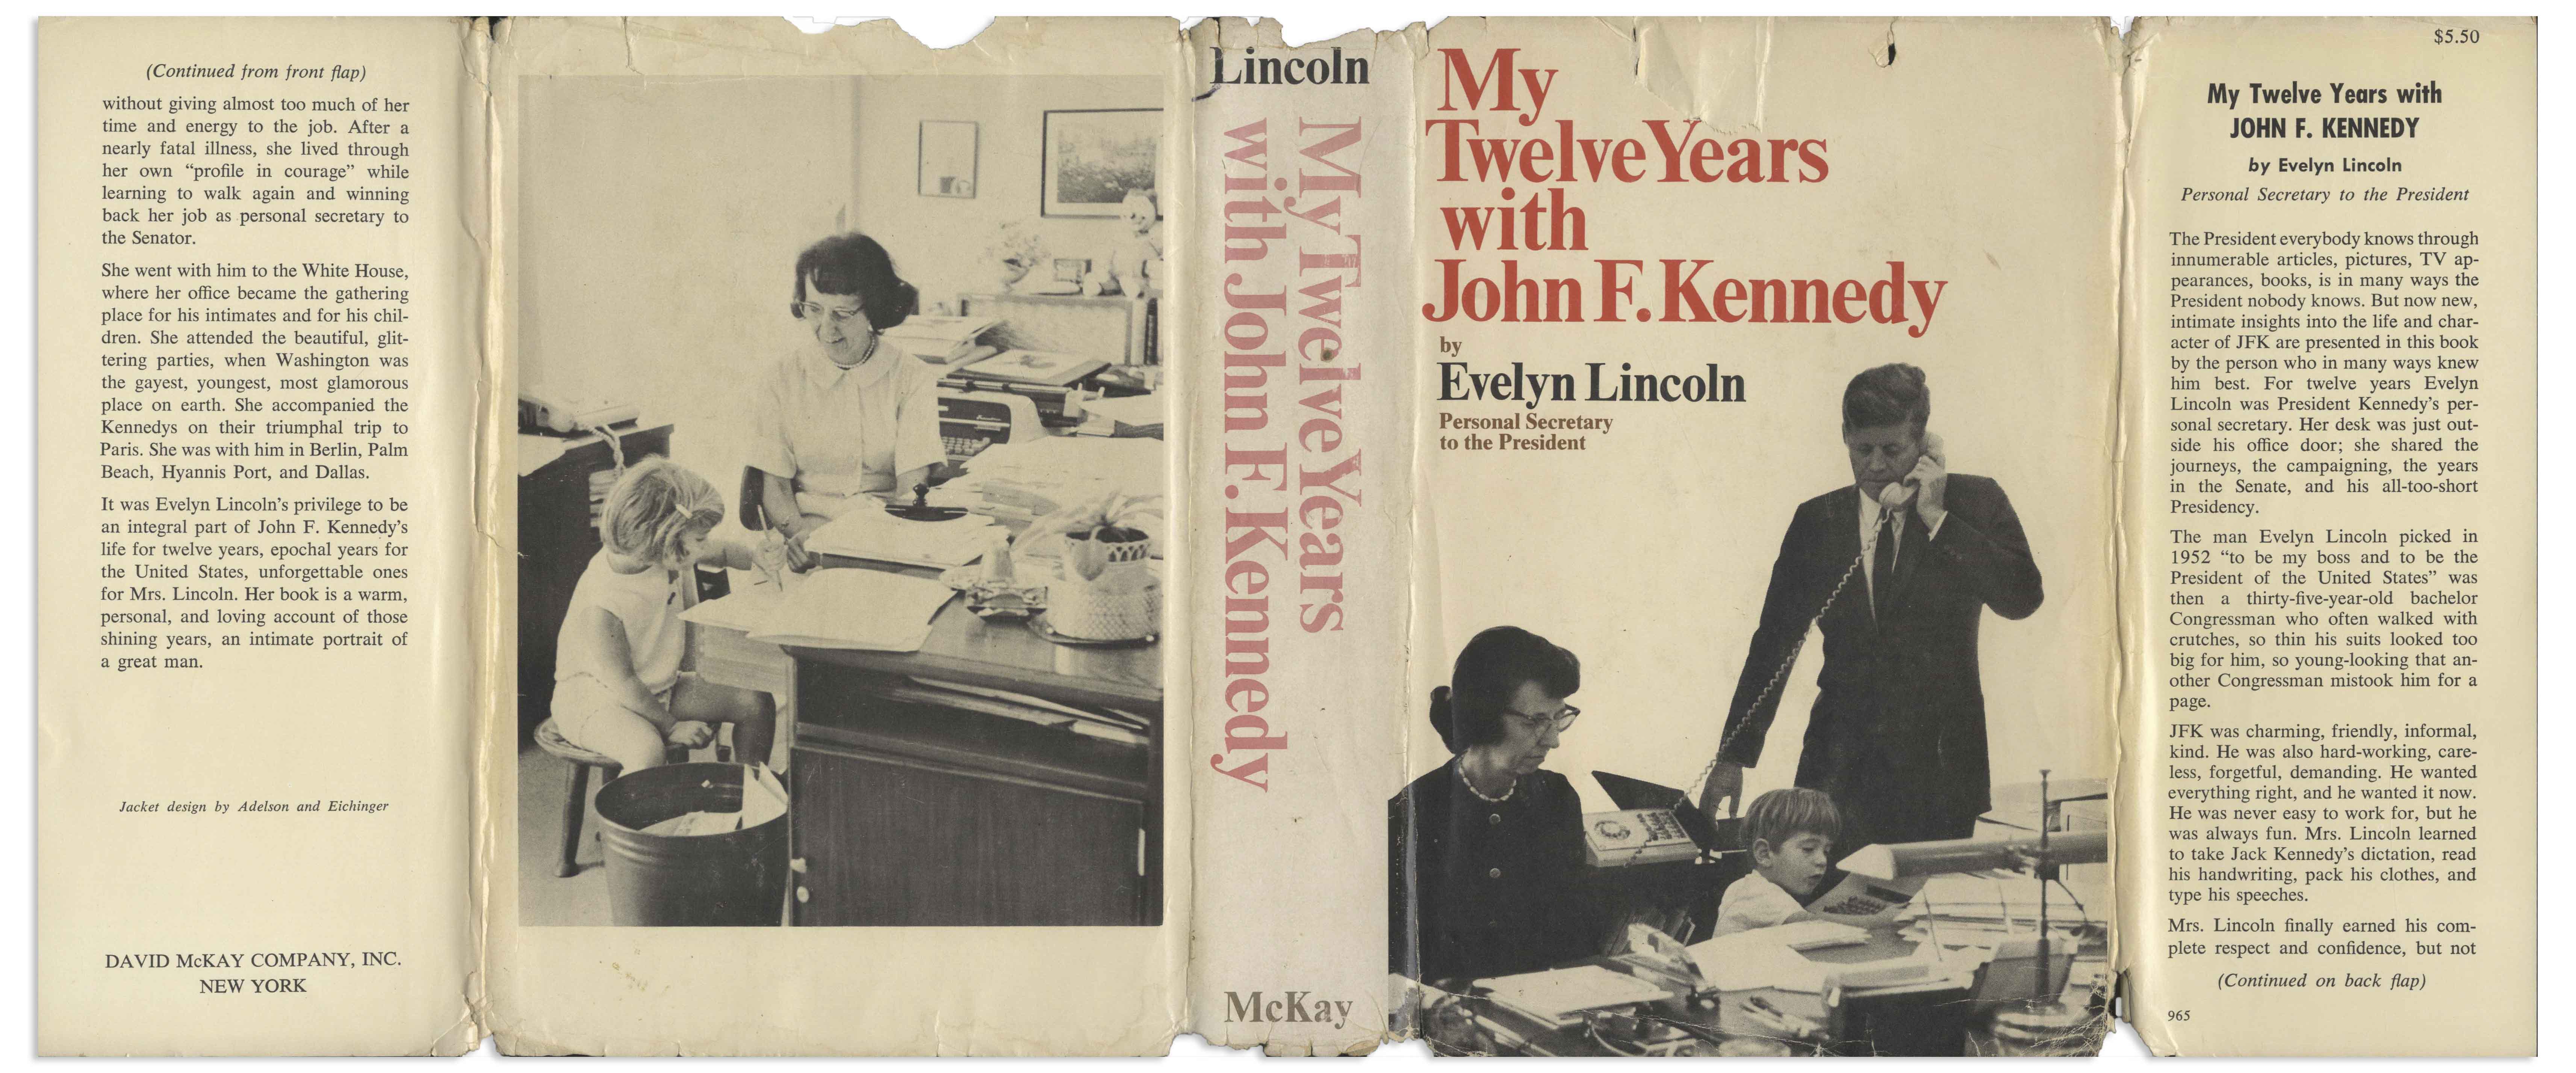 Lot Detail - Evelyn Lincoln Signed Copy of Her Book ''My Twelve Years